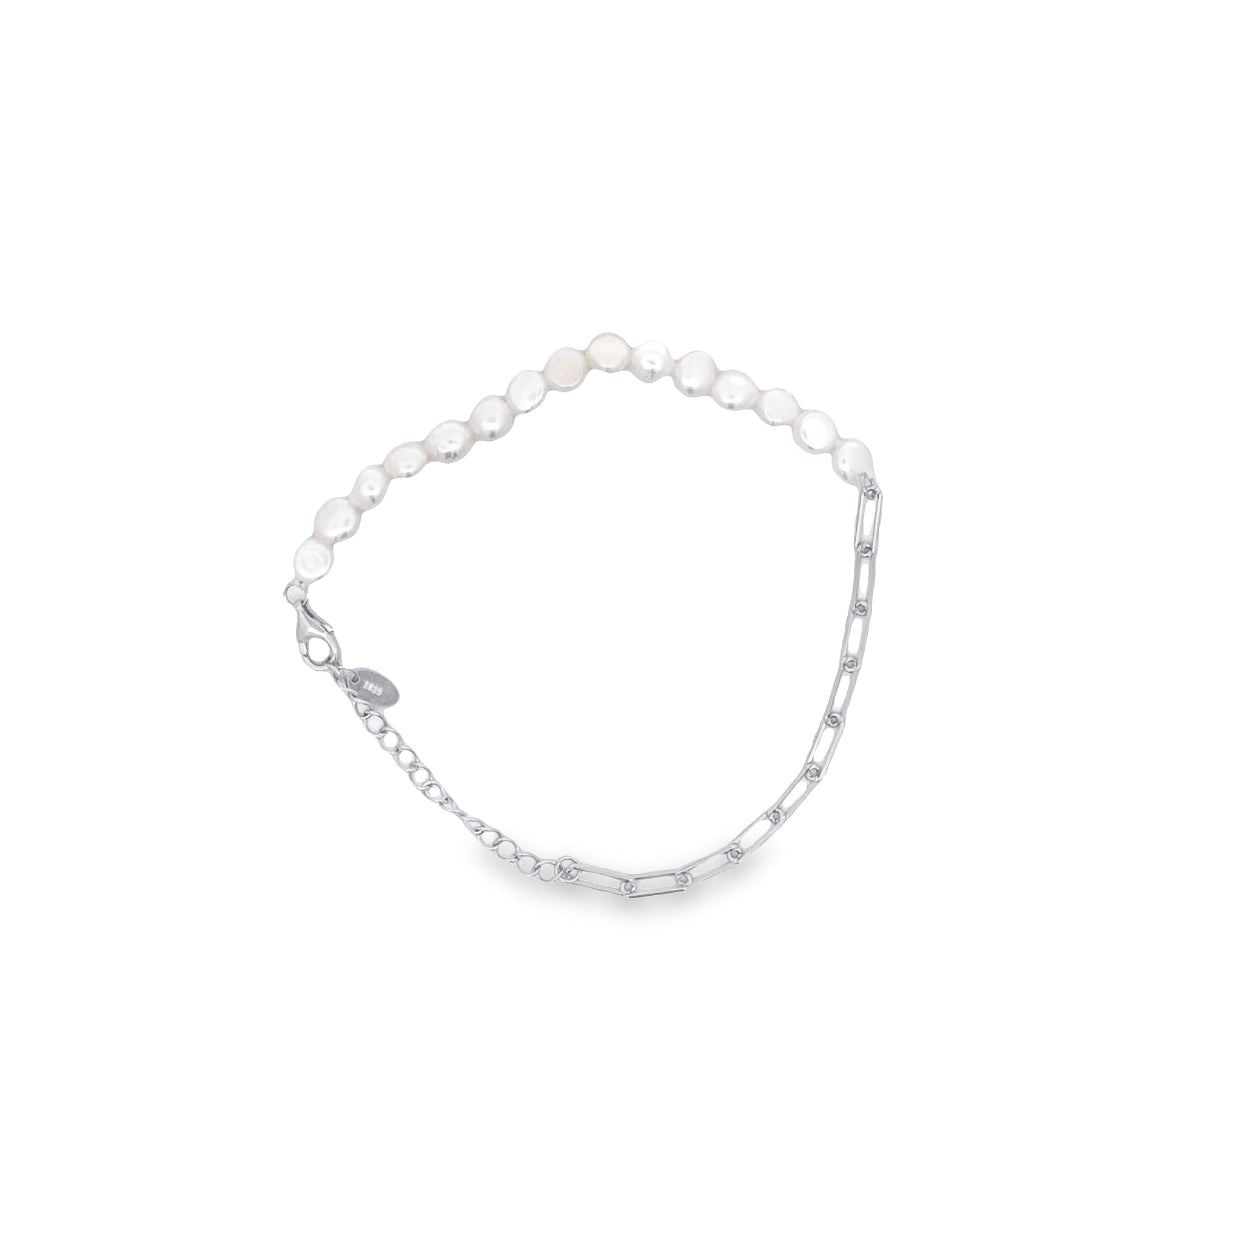 Onatah Sterling Silver Bracelet With Small Pearls And Silver Links